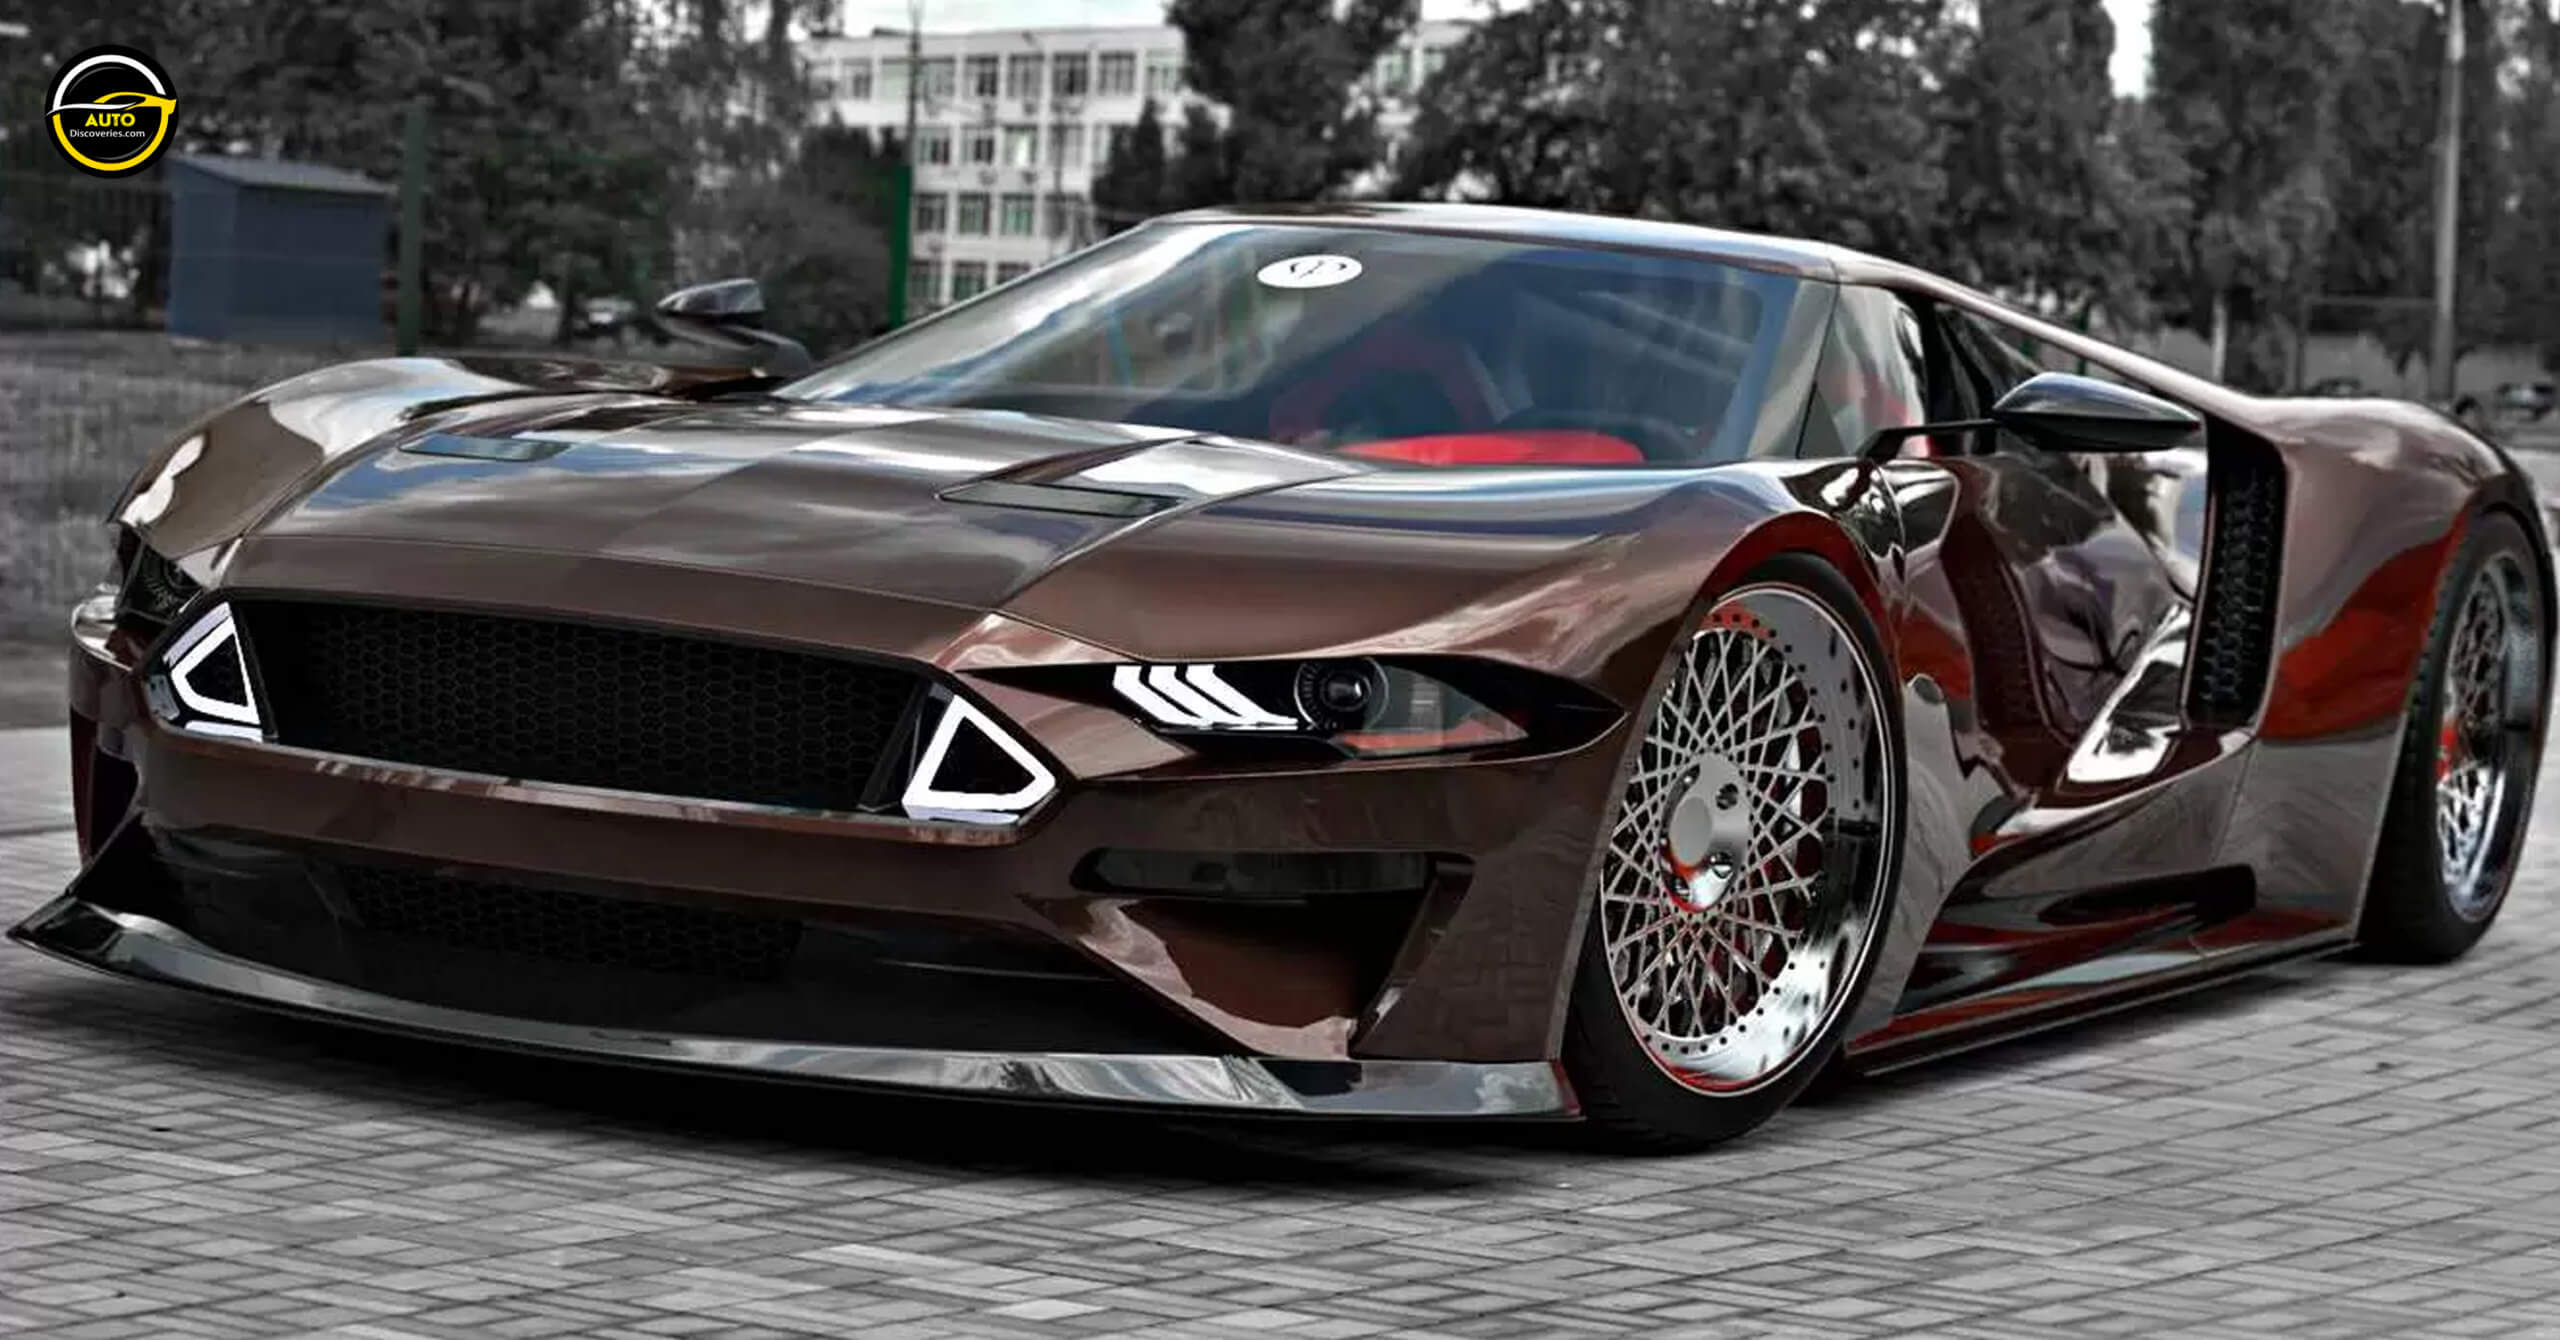 Mustang GT Mid Engine Designed by Rostislav Prokop Auto Discoveries